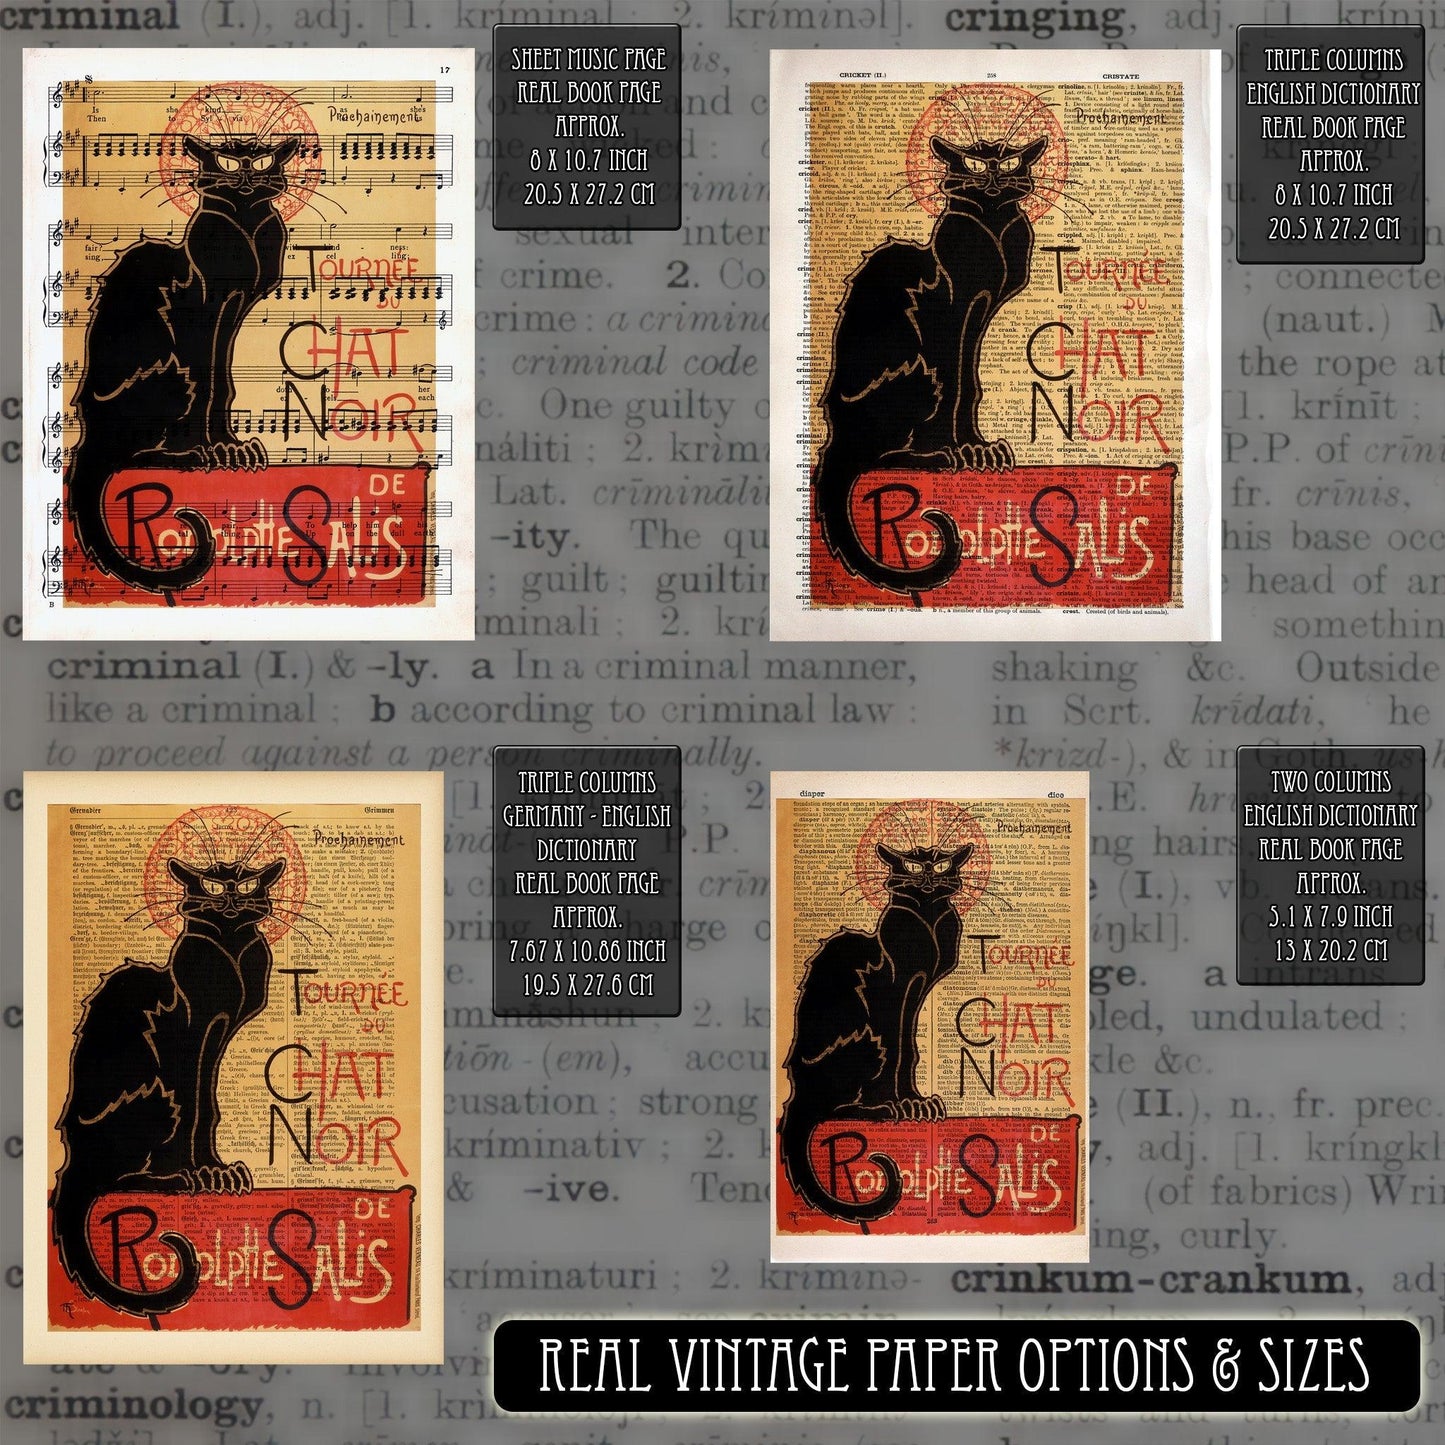 Give your home decor a touch of elegance through our exquisite Cabaret du Chat Noir reproduction poster. The artwork is a collage with the poster Cabaret du Chat Noir, Paris, poster designed by Théophile Alexandre Steinlen (Swiss graphic designer, 1859-1923 ). Year of created 1896.